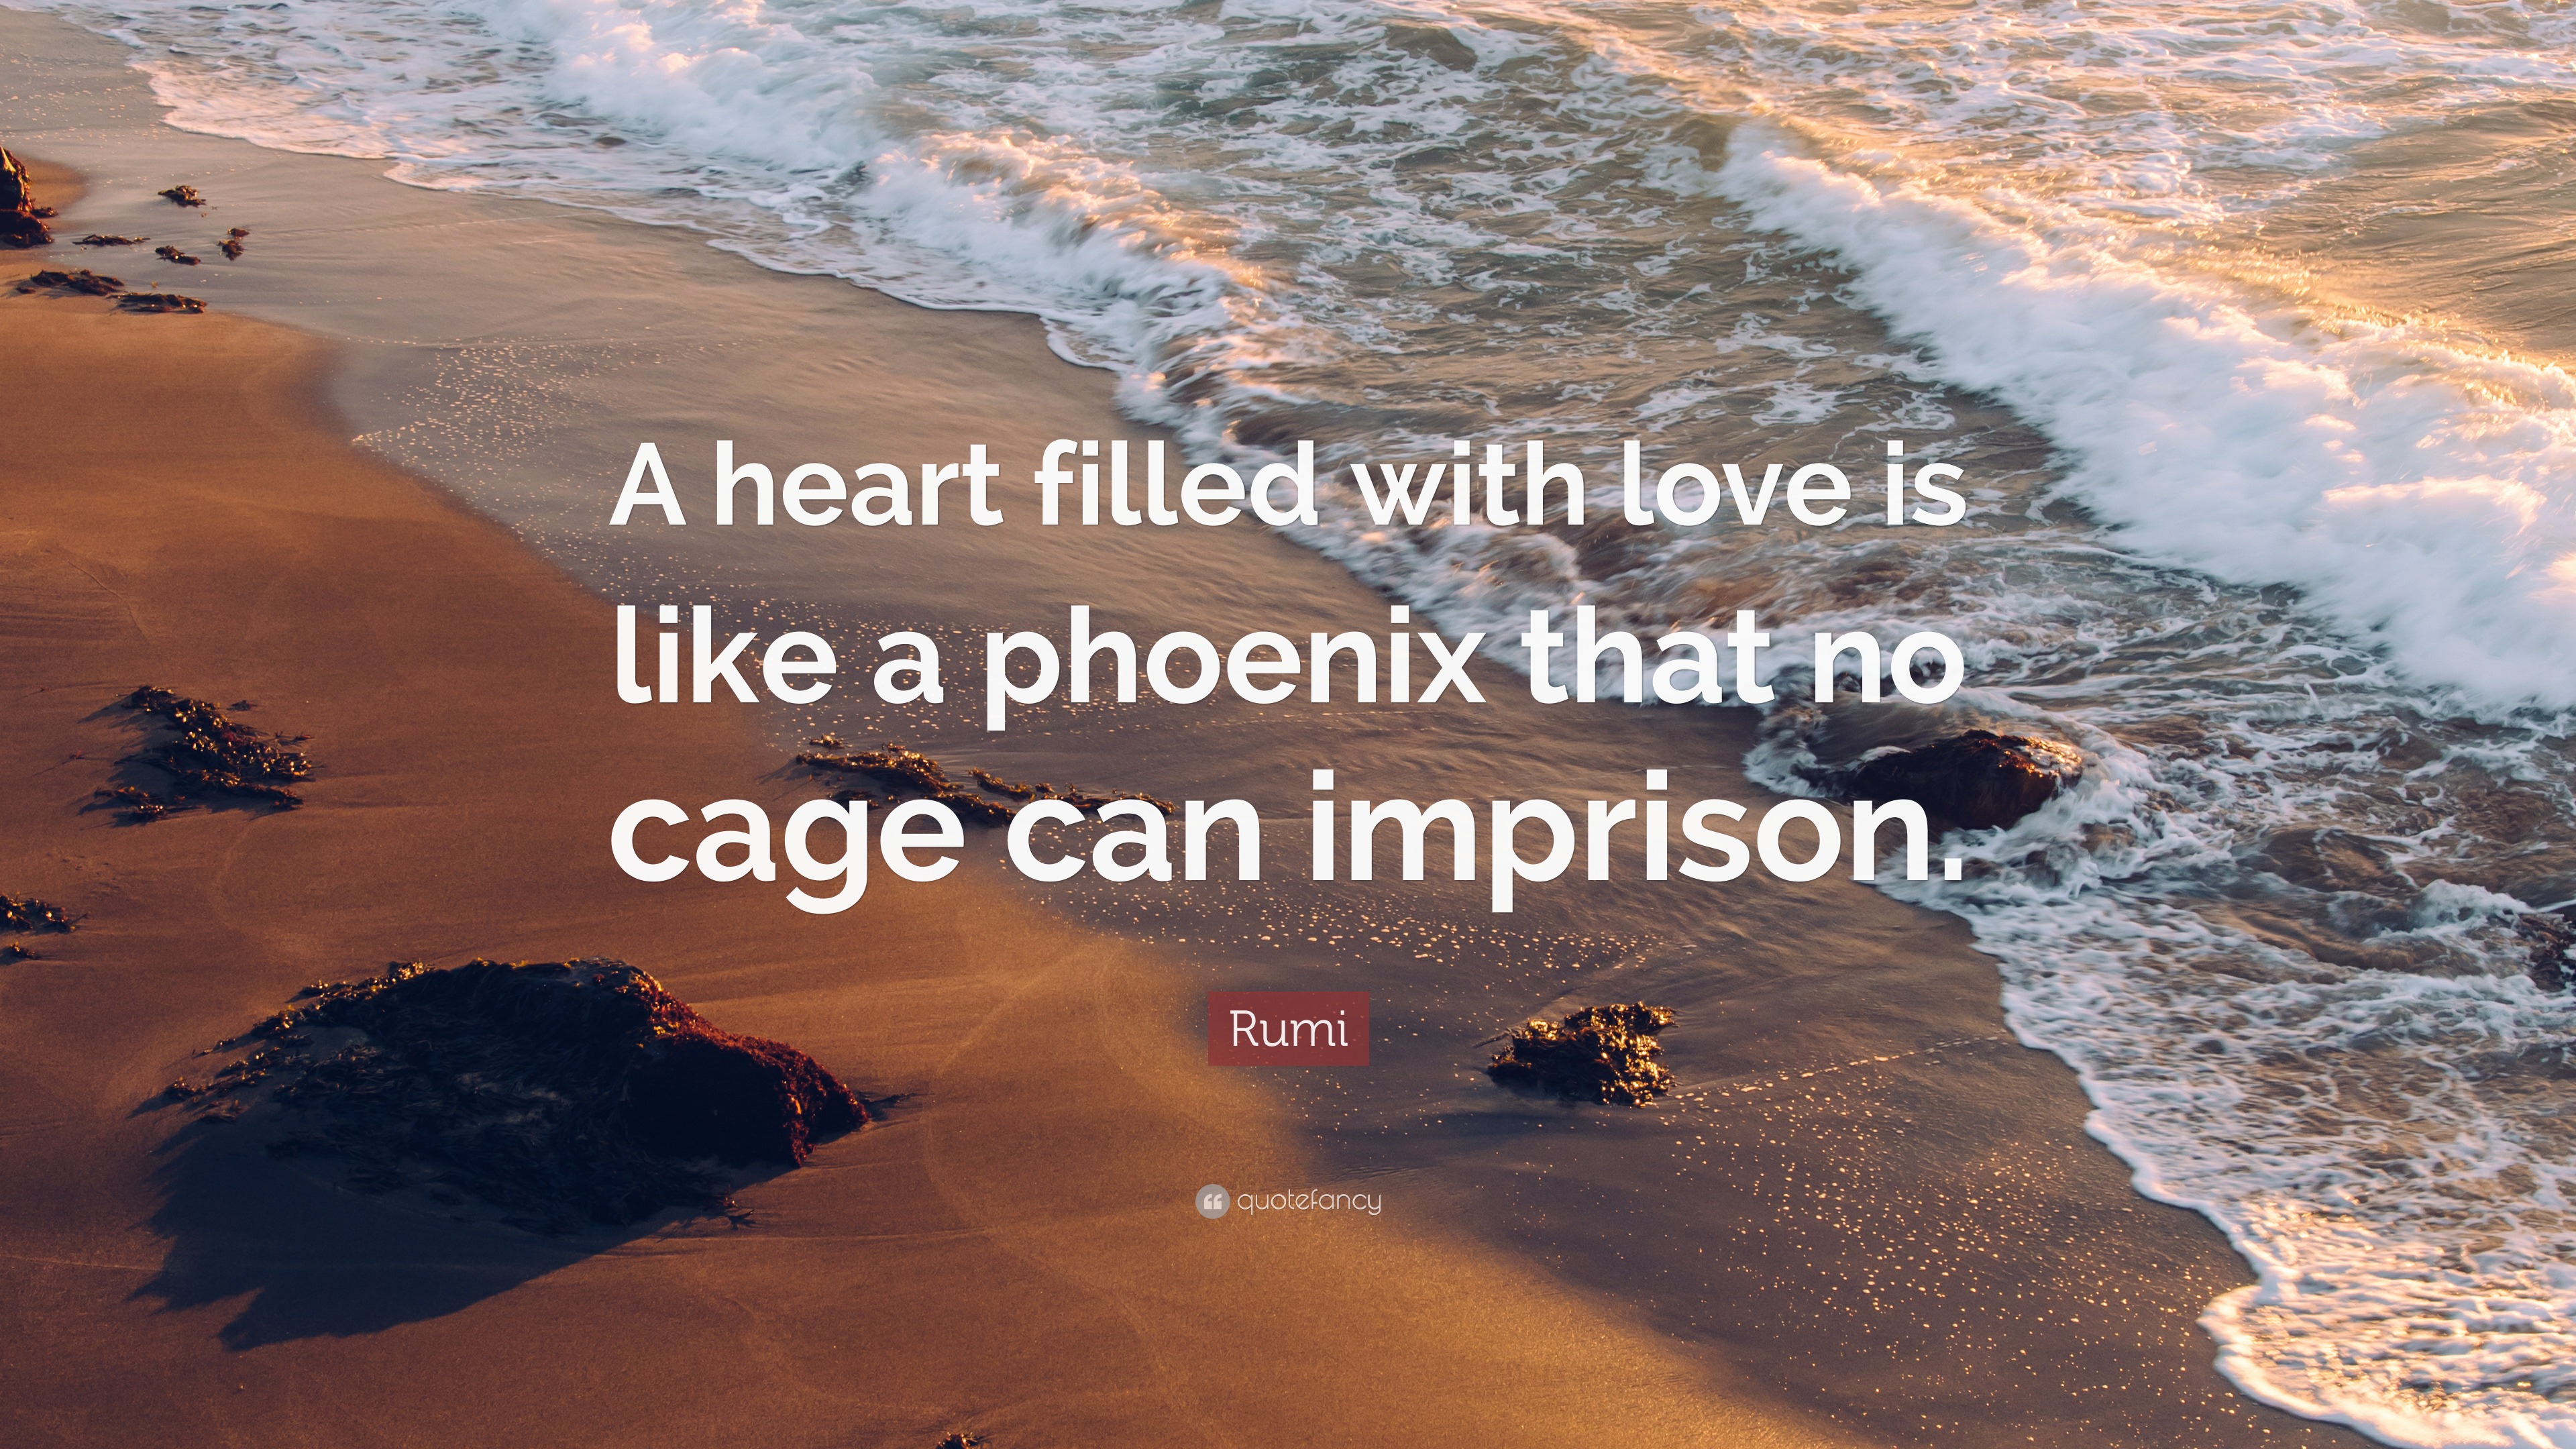 Rumi Quote “A heart filled with love is like a phoenix that no cage